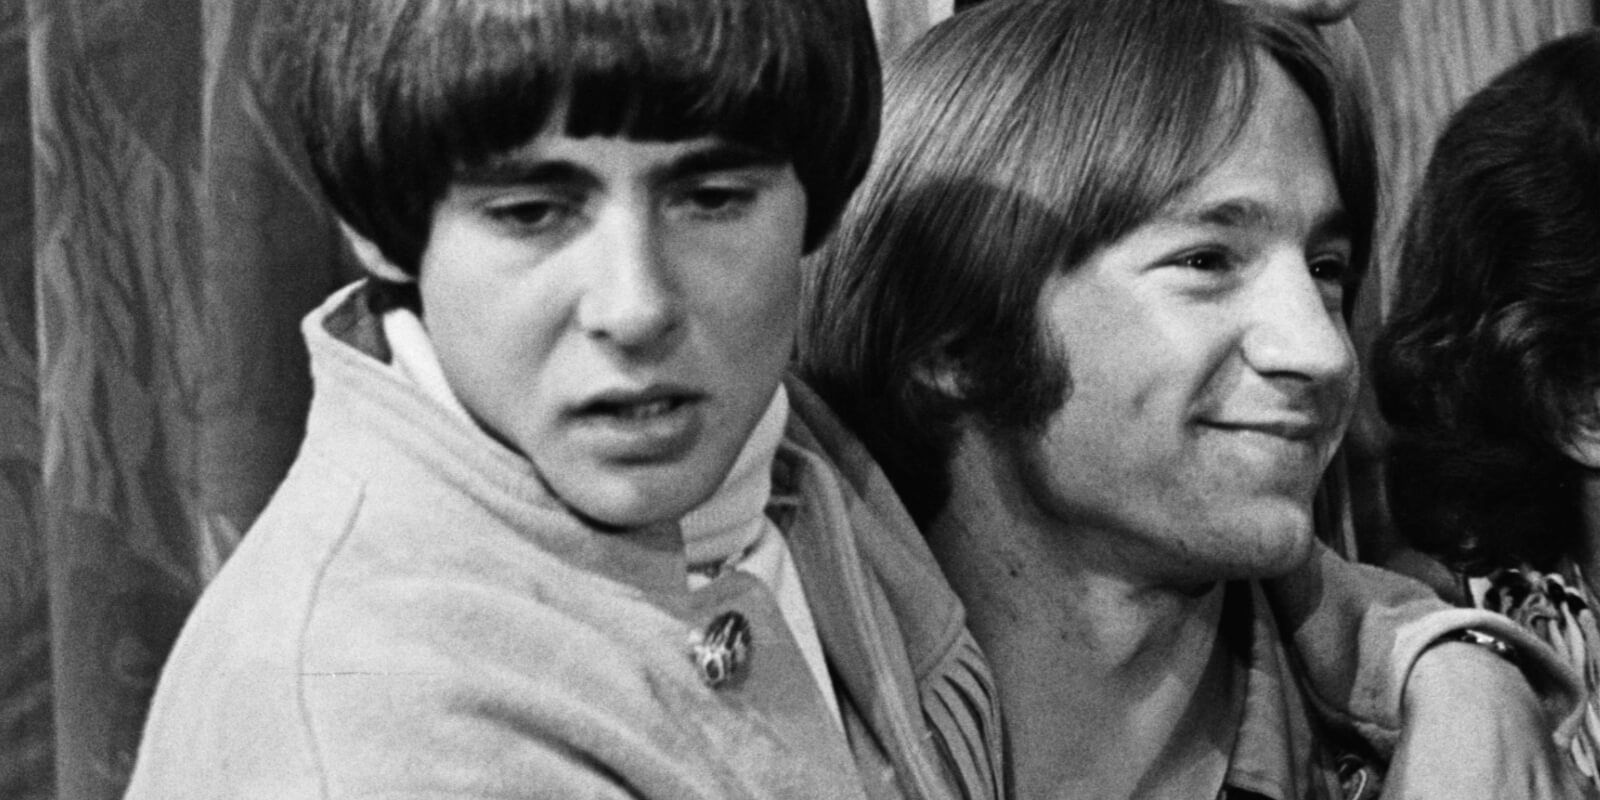 Davy Jones and Peter Tork at a press conference at The Royal Garden Hotel, London, 29th June 1967.